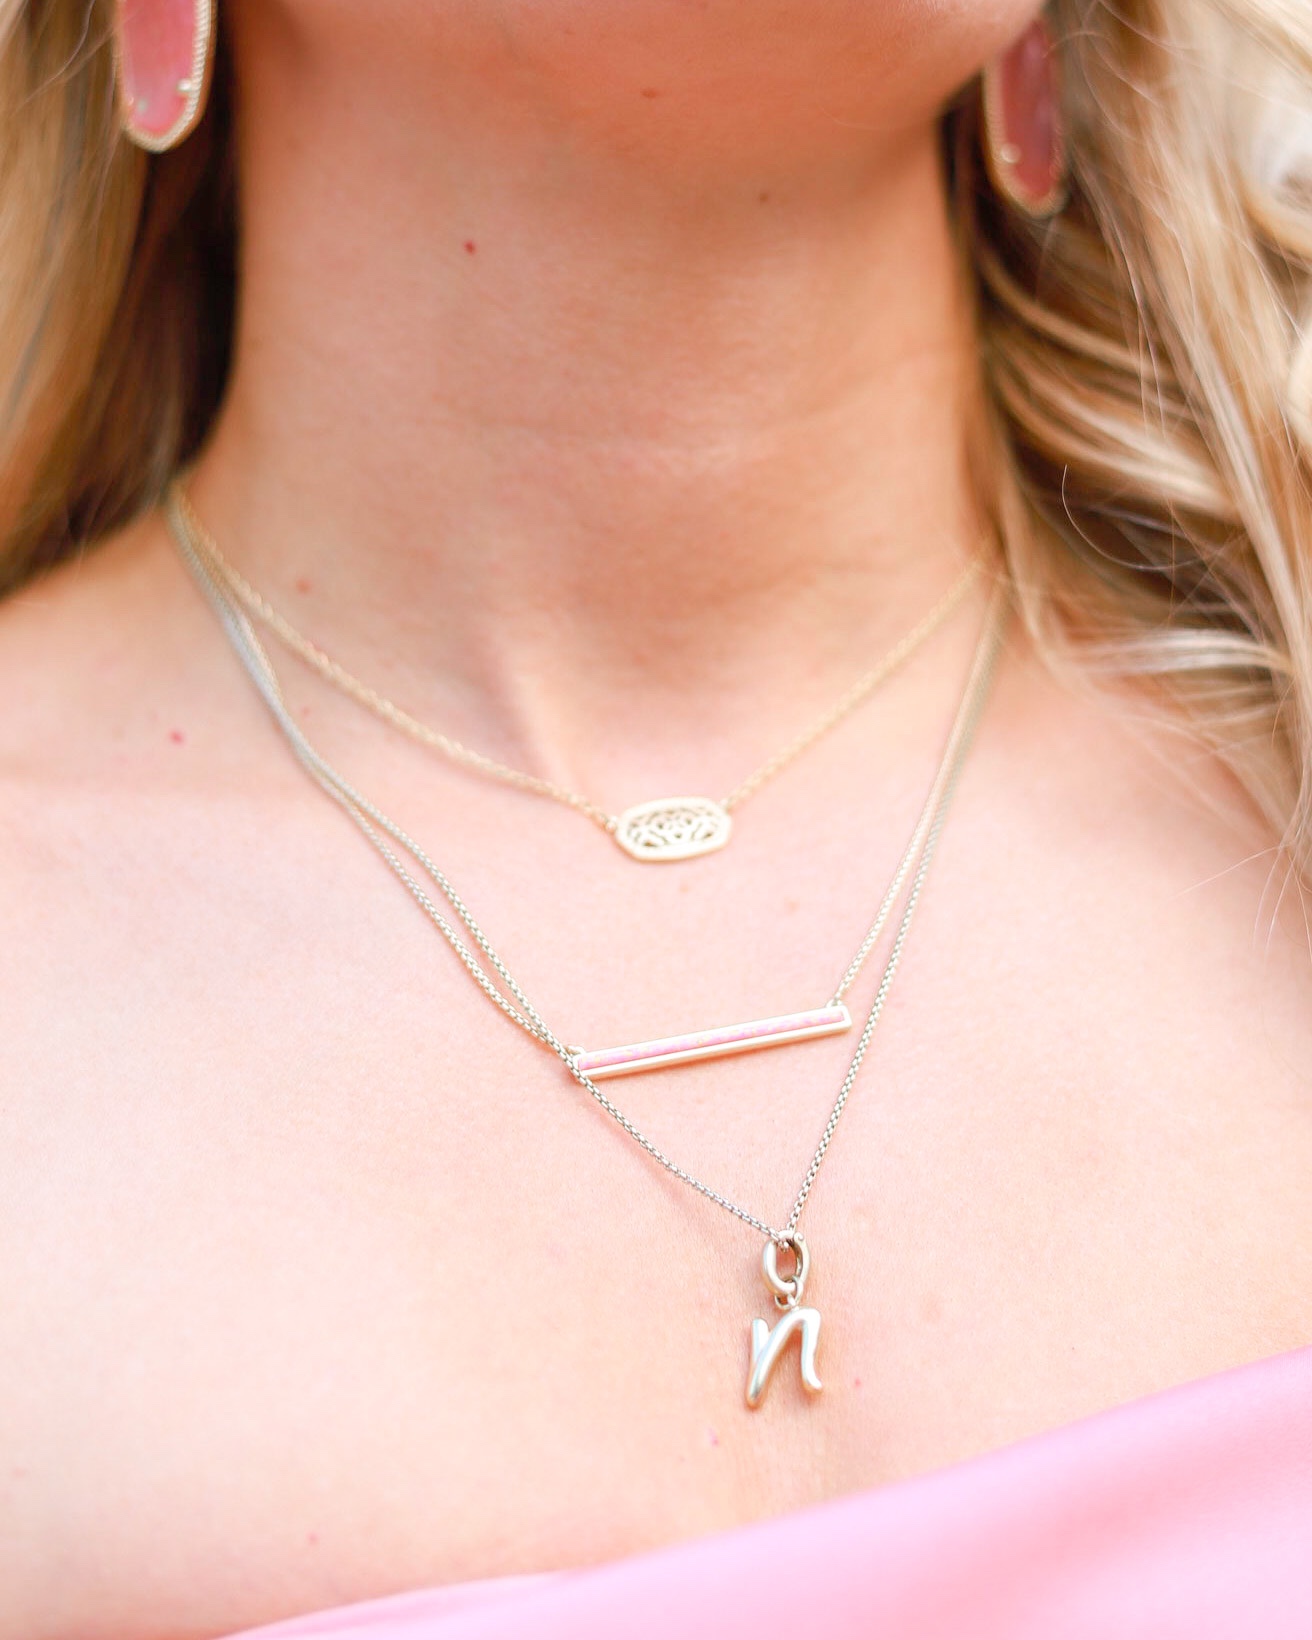 HOW TO LAYER JEWELRY NECKLACES